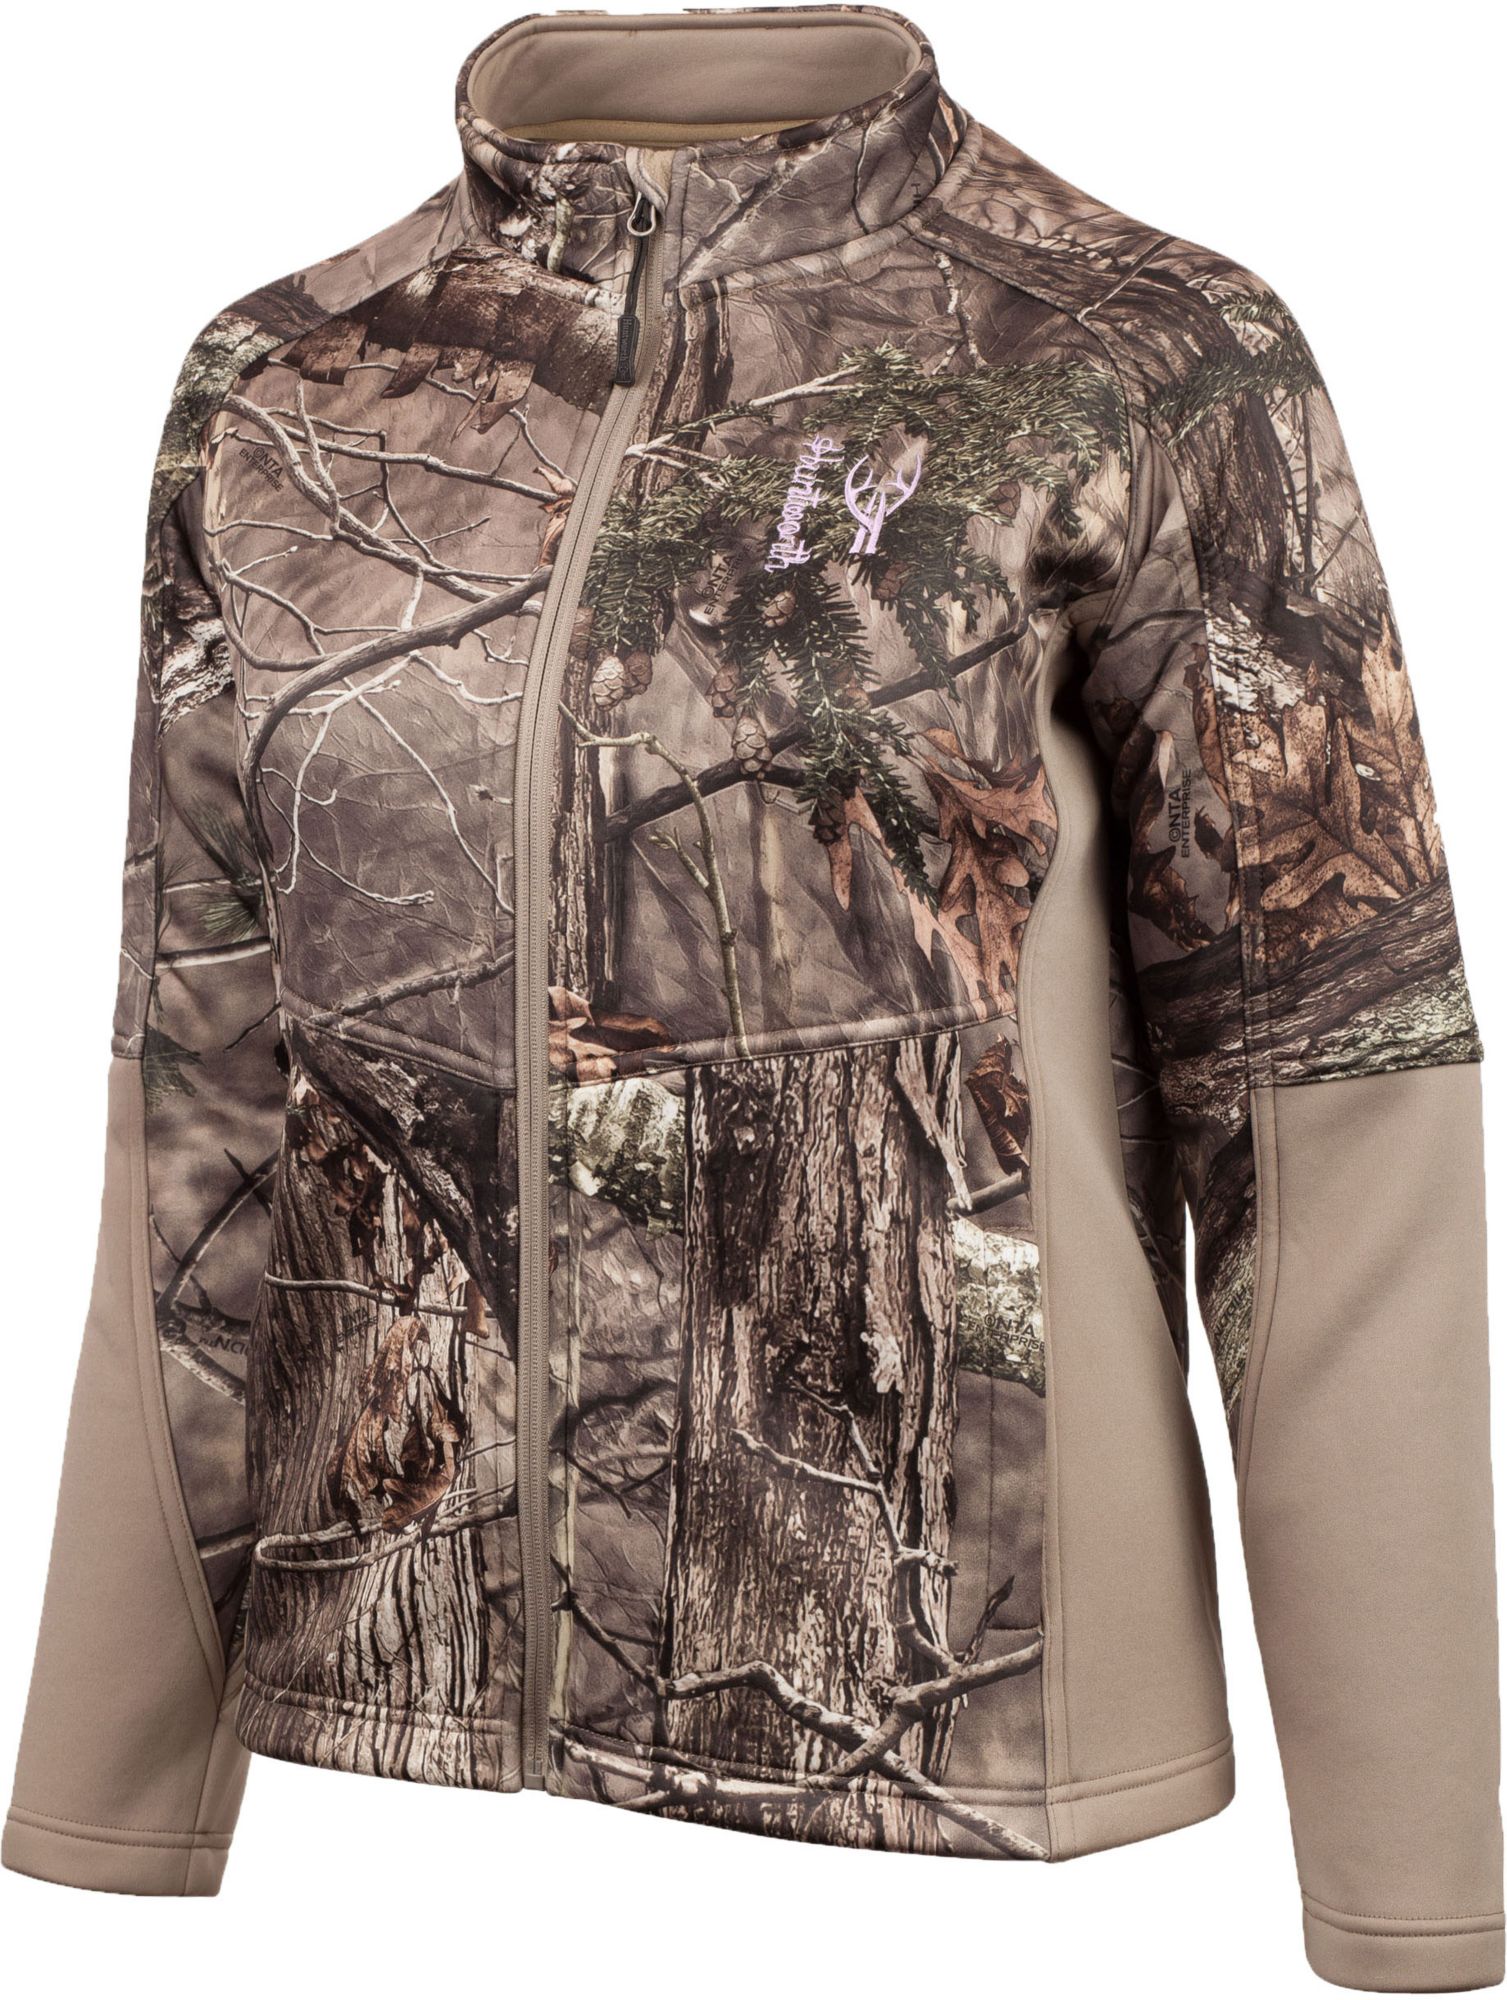 Hunting Jackets & Vests for Men, Women & Kids | Best Price Guarantee at ...